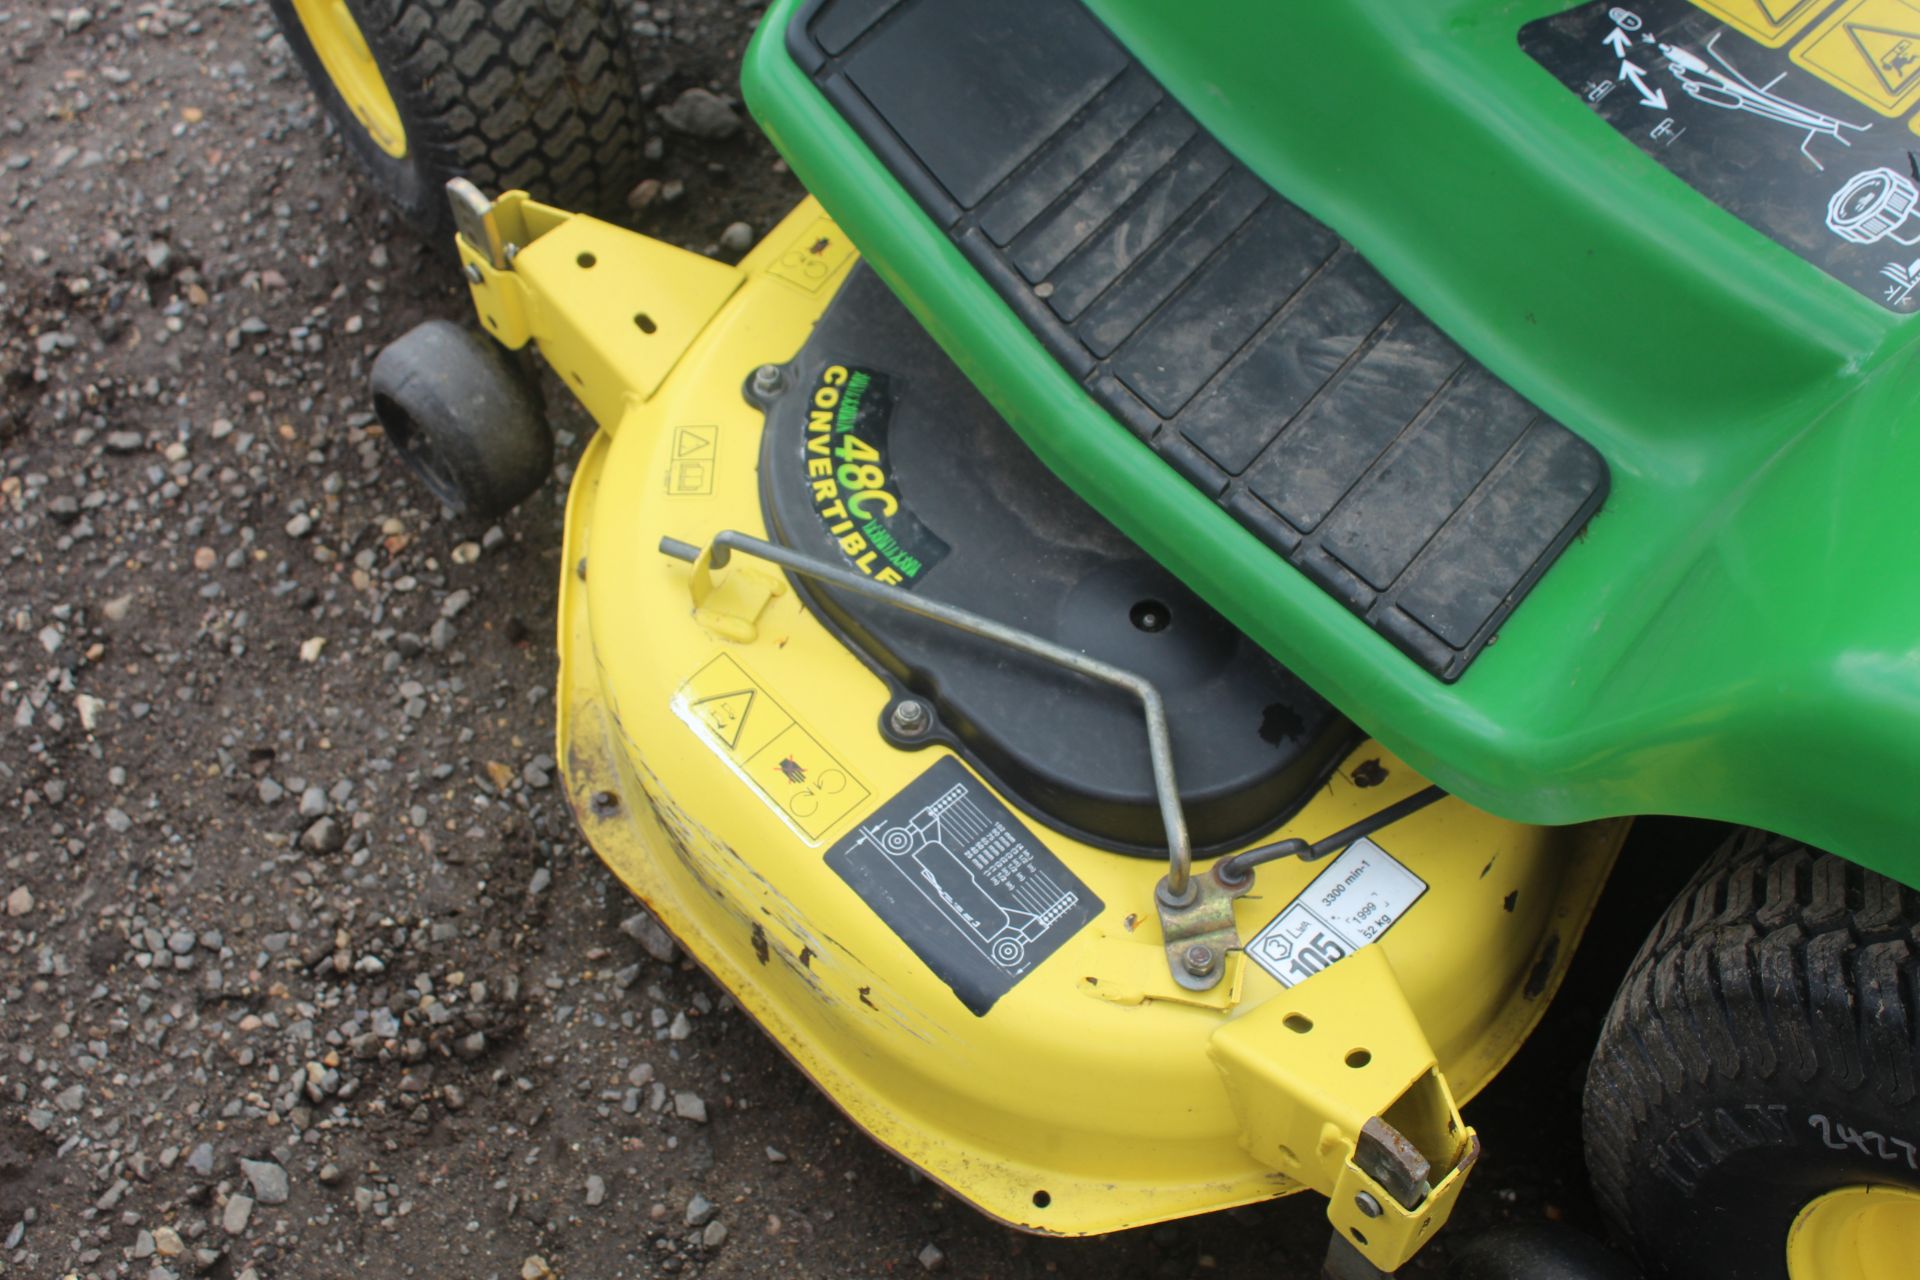 John Deere LX279 lawn mower with collector. Owned from new. Key held. - Image 19 of 30